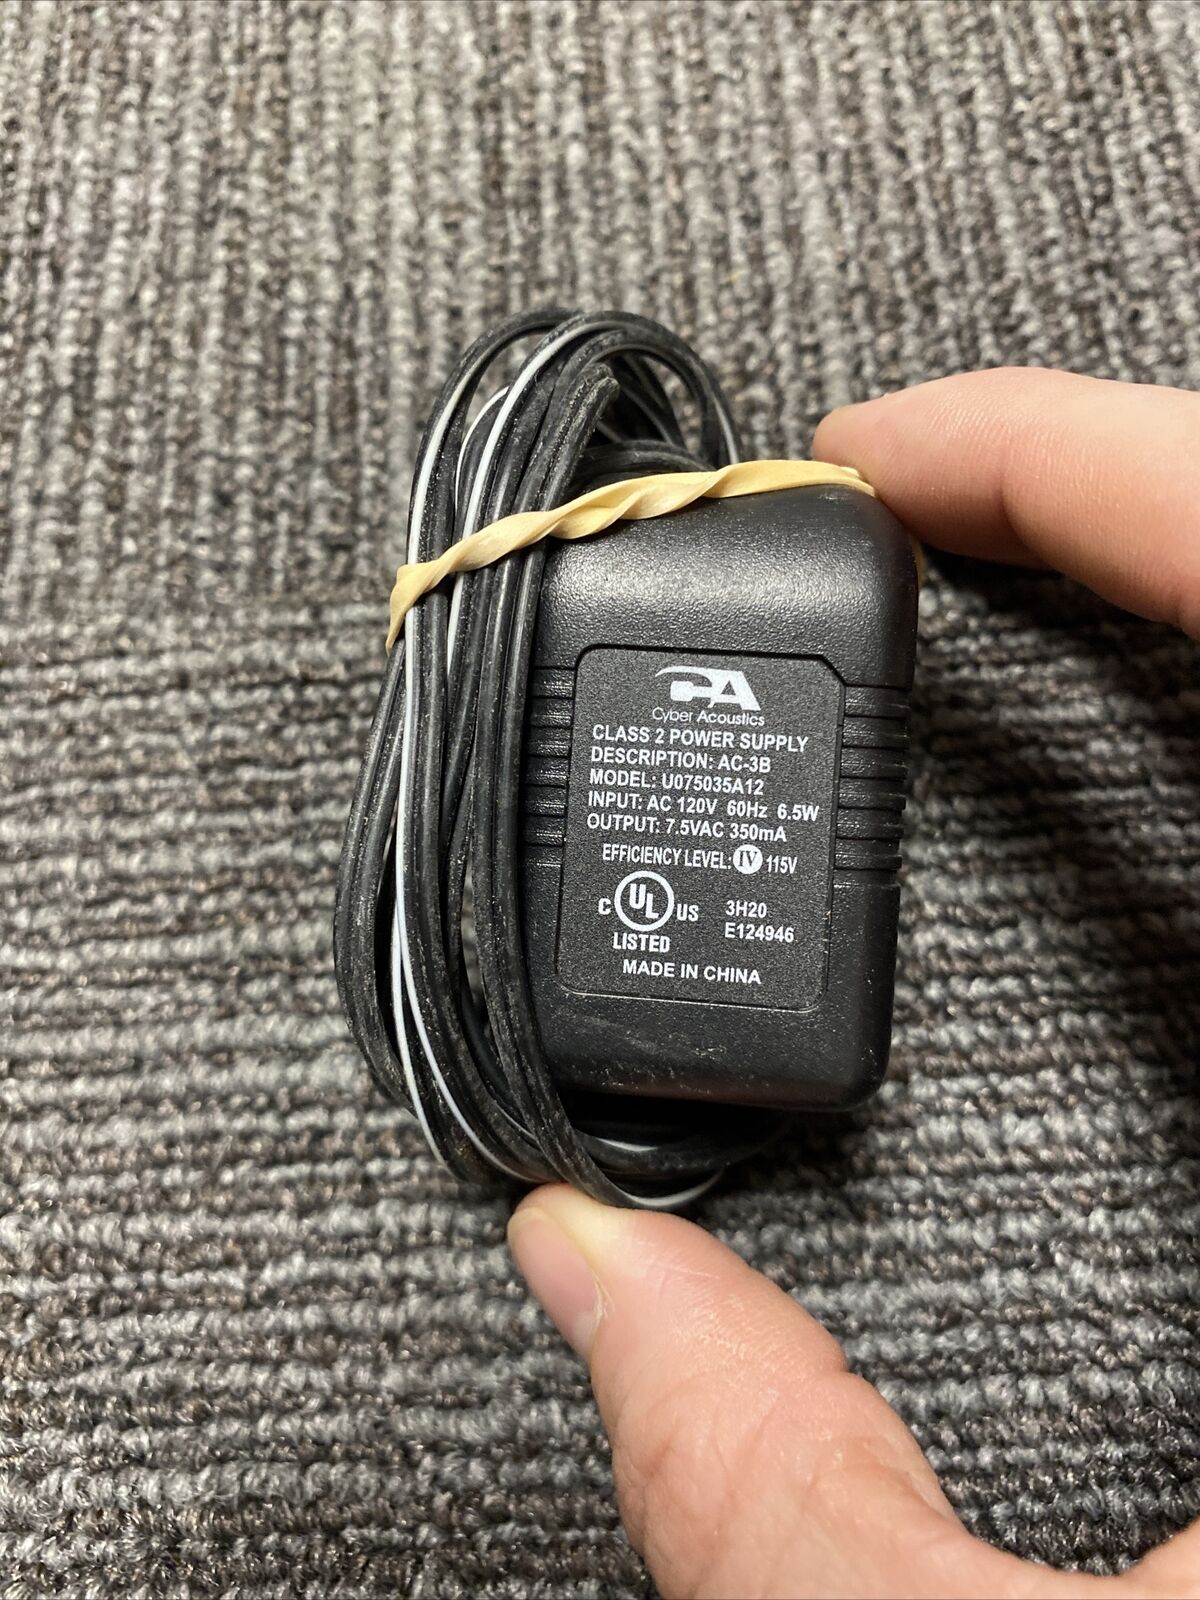 Cyber Acoustics AC-3 U075035D Class 2 Power Supply AC-3 7.5V 350mA 8W Adapter Compatible Brand: Universal Connection S